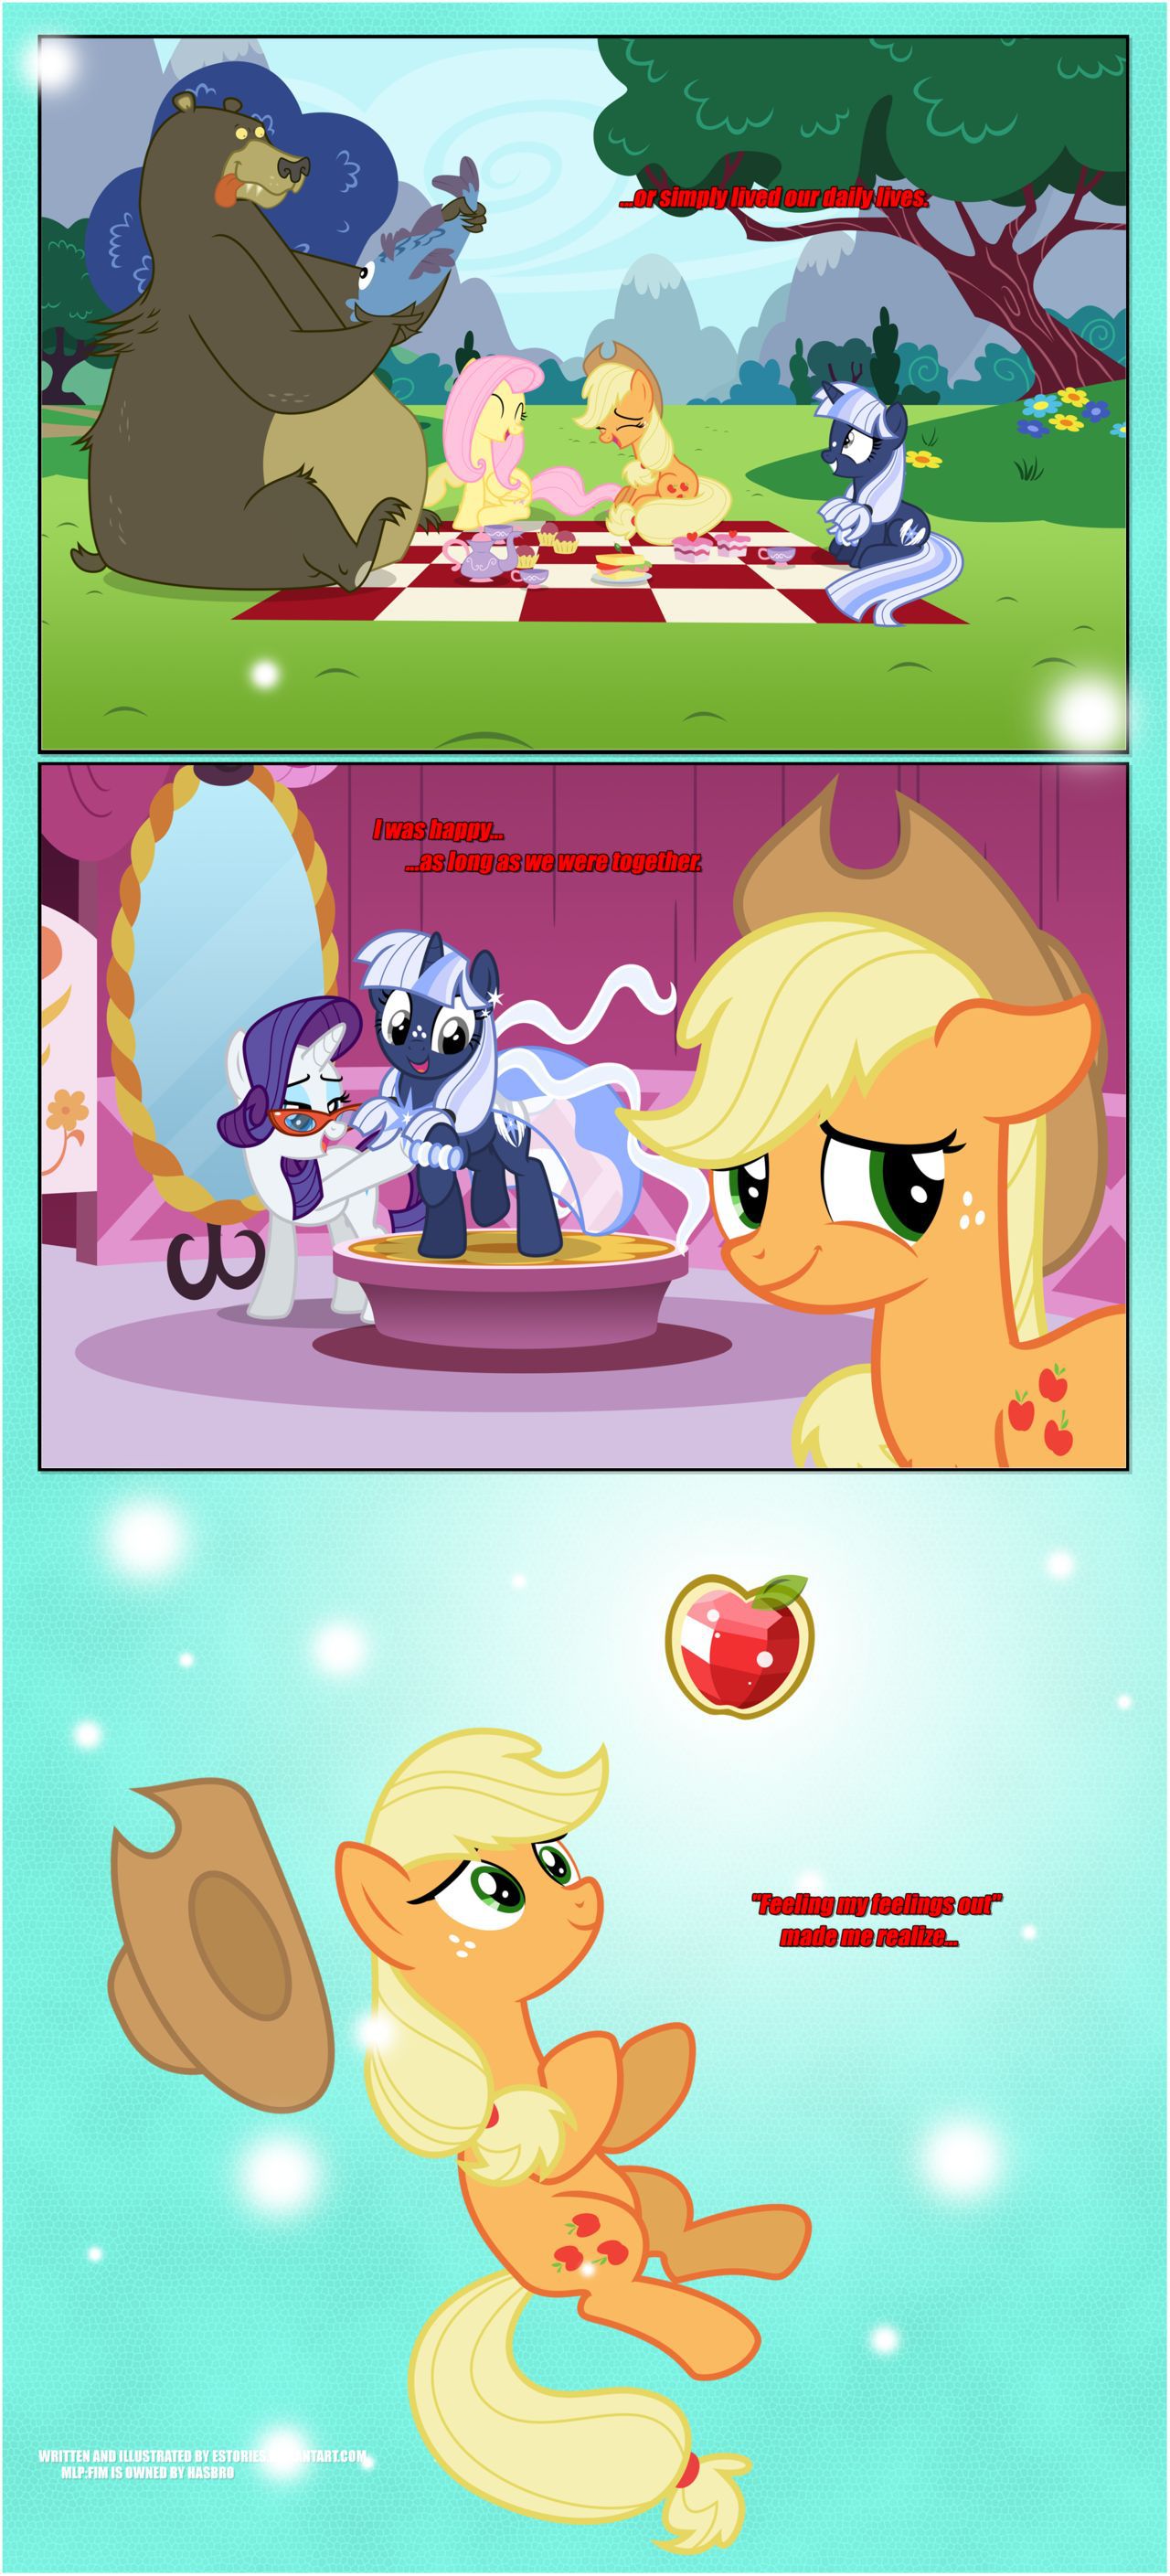 [EStories] Appleffection (My Little Pony Friendship is Magic) [Ongoing] 94